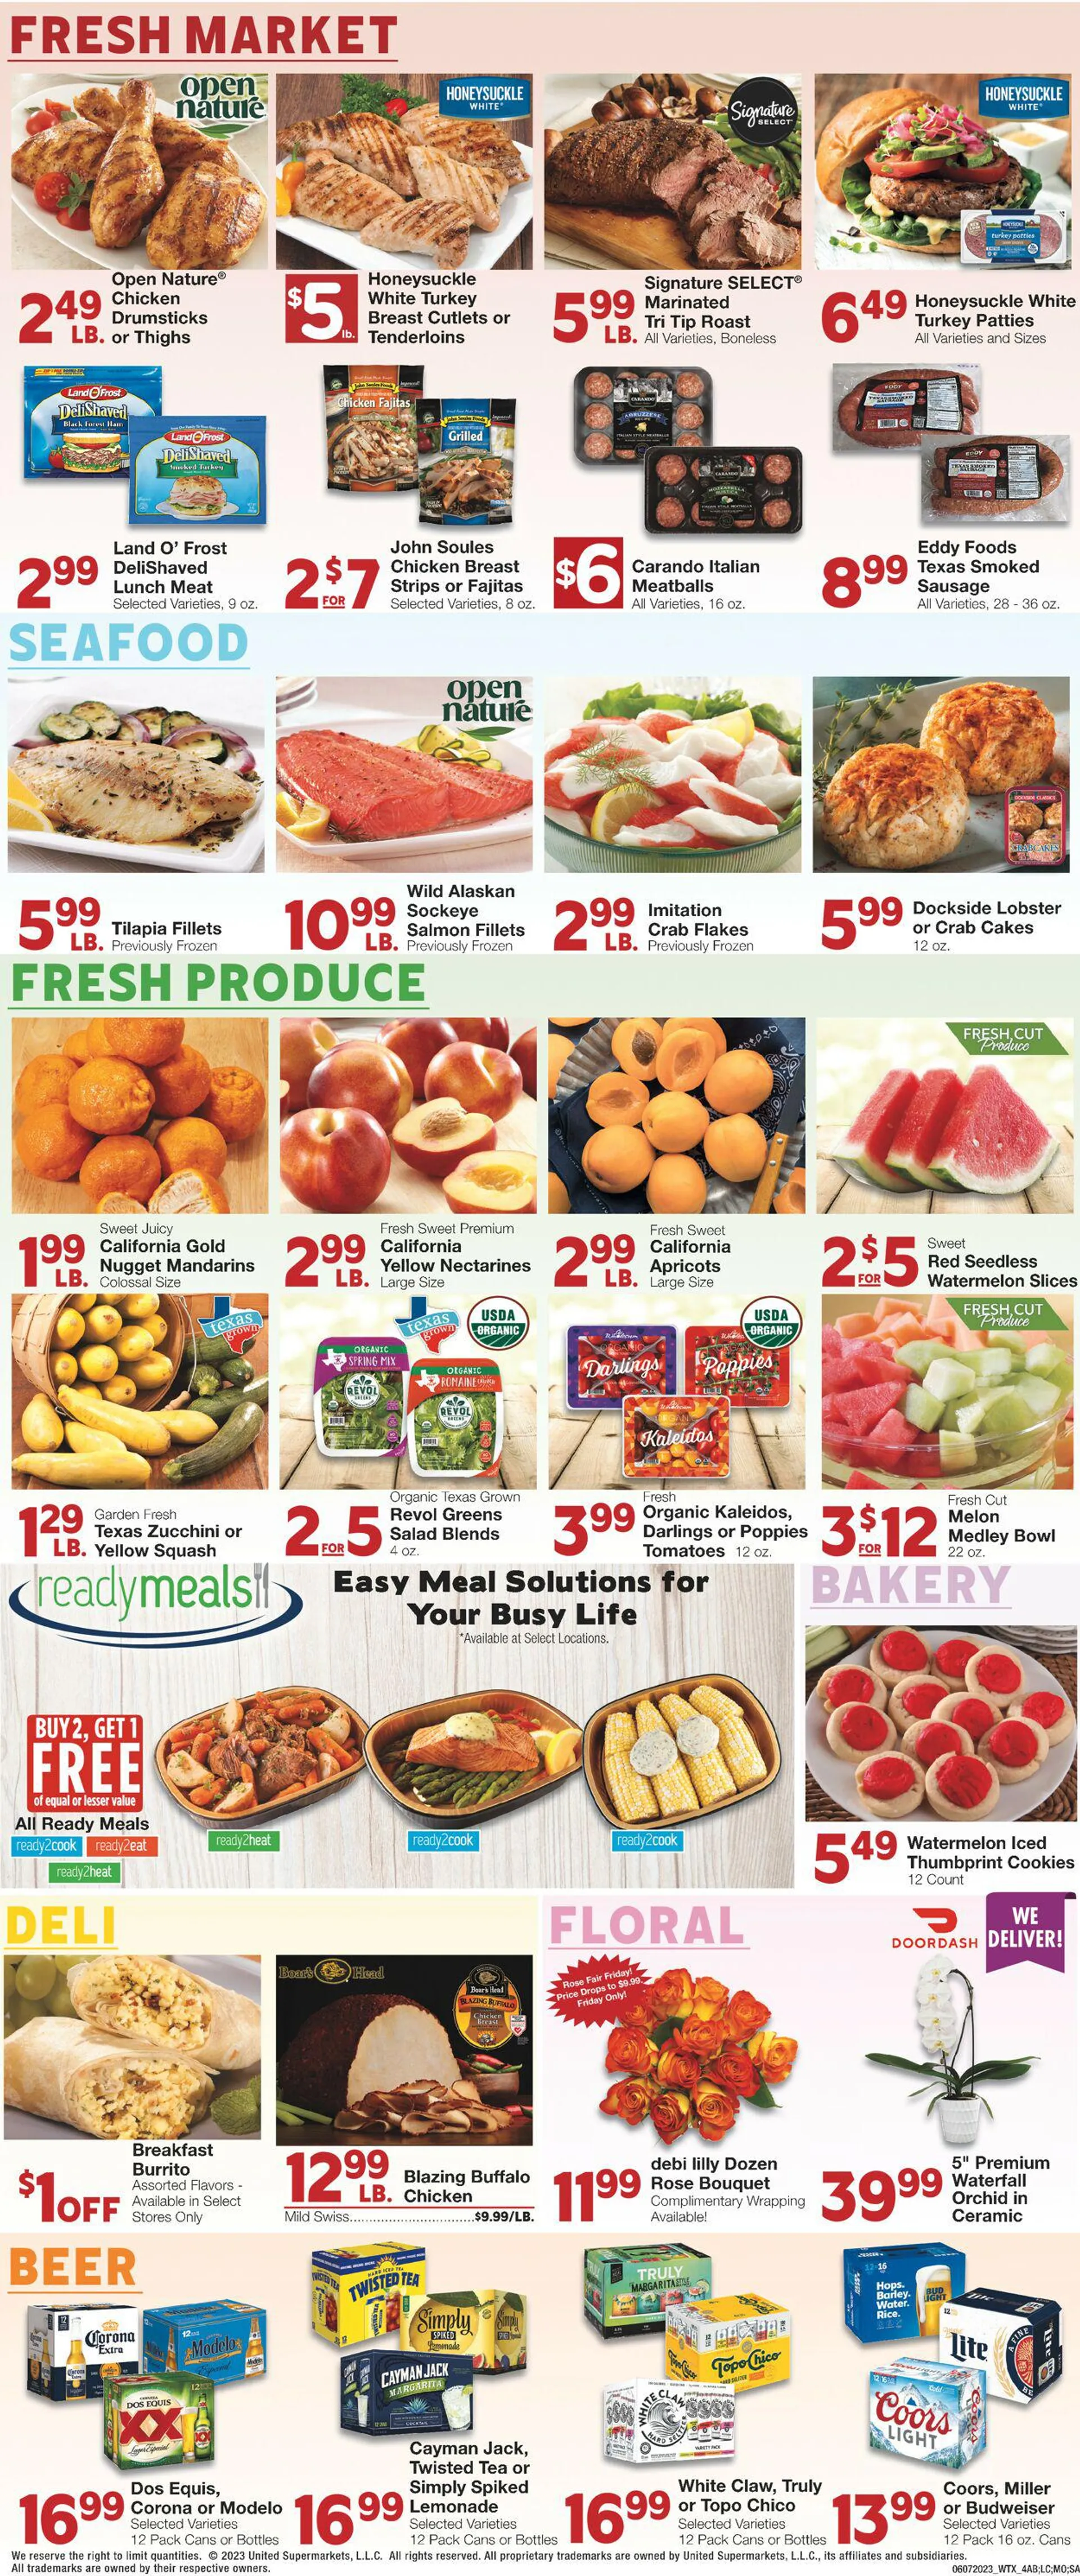 United Supermarkets Current weekly ad - 4